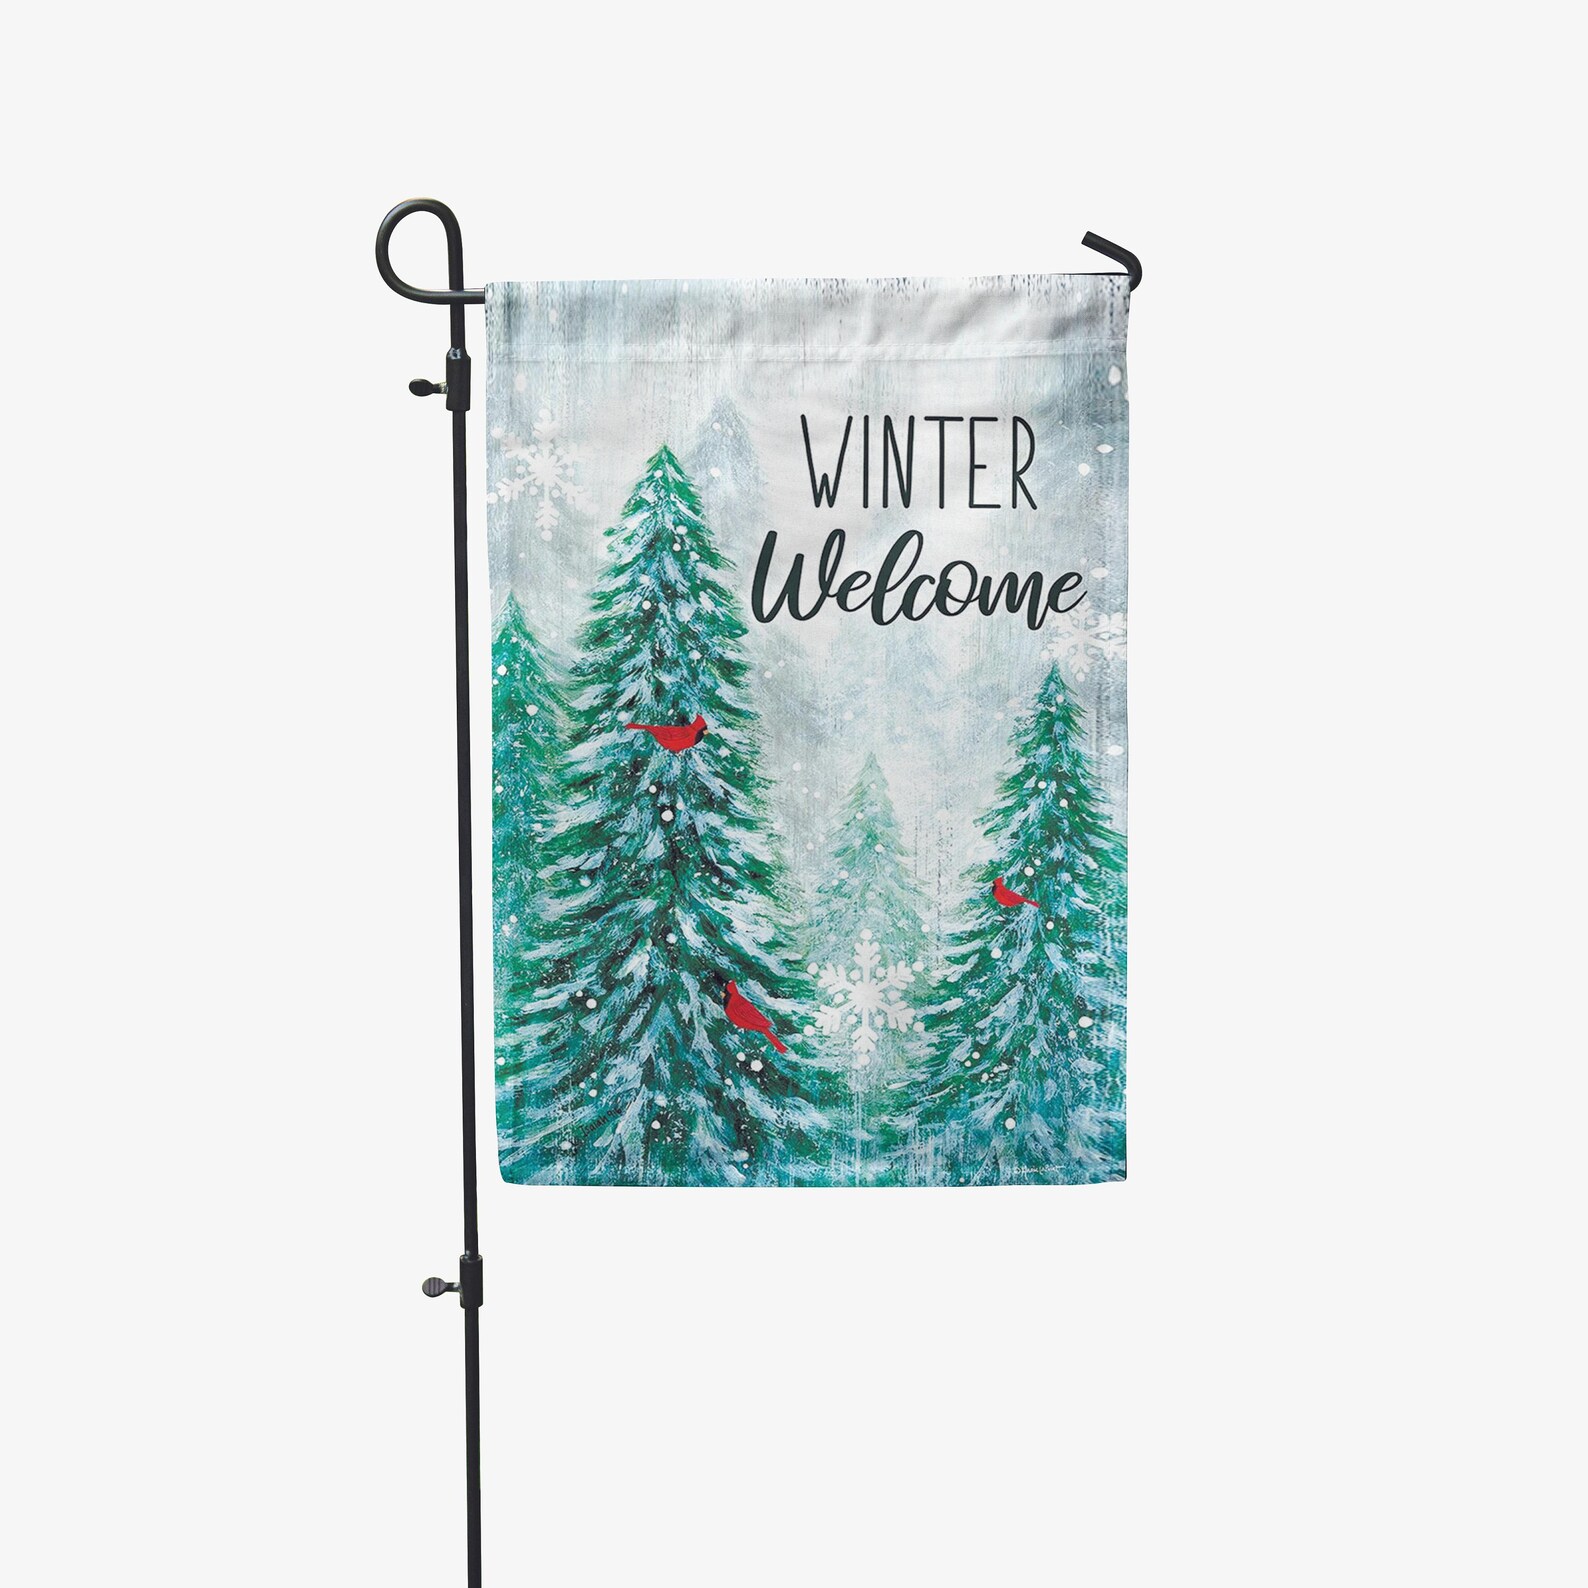 Winter Welcome Christmas Holidays Garden Flag 12x18 in | Etsy